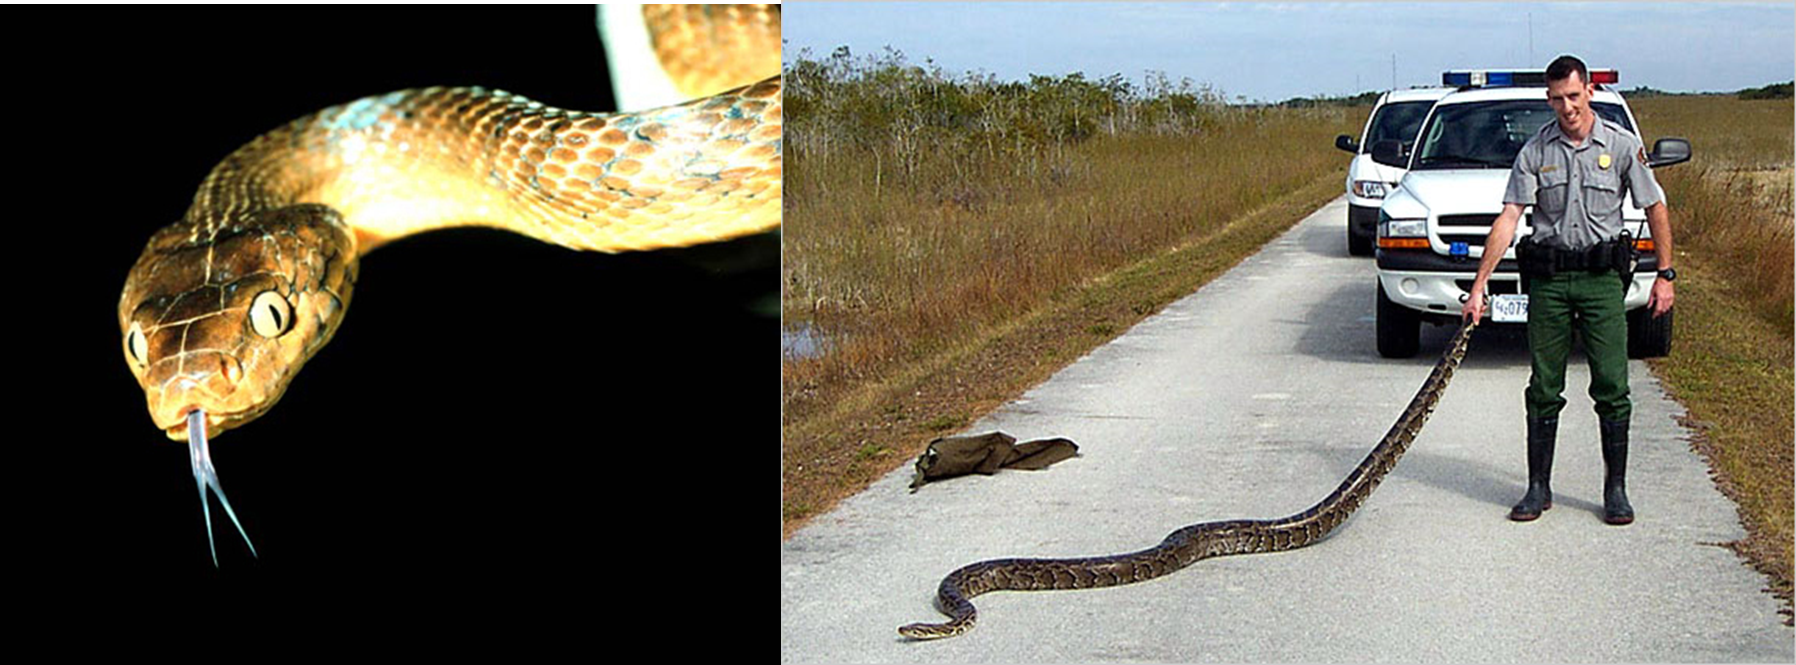 Two photographs. Photo on left shows a snake mottled brown and tan, with a forked tongue sticking out of its mouth. Photo on right shows a park ranger holding the tail of a very long python.